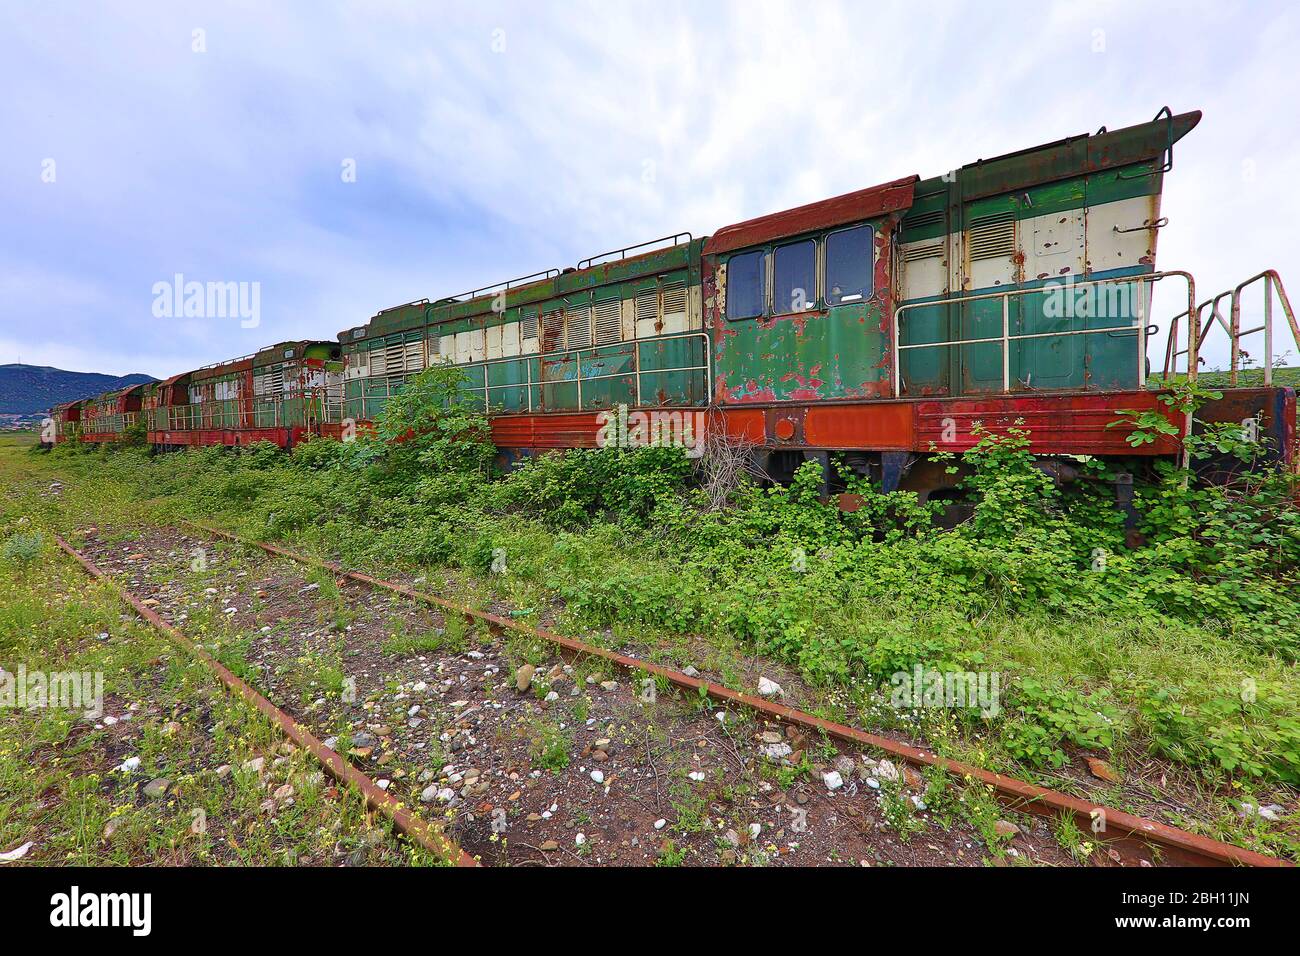 Abandoned old train from communist era in Albania Stock Photo